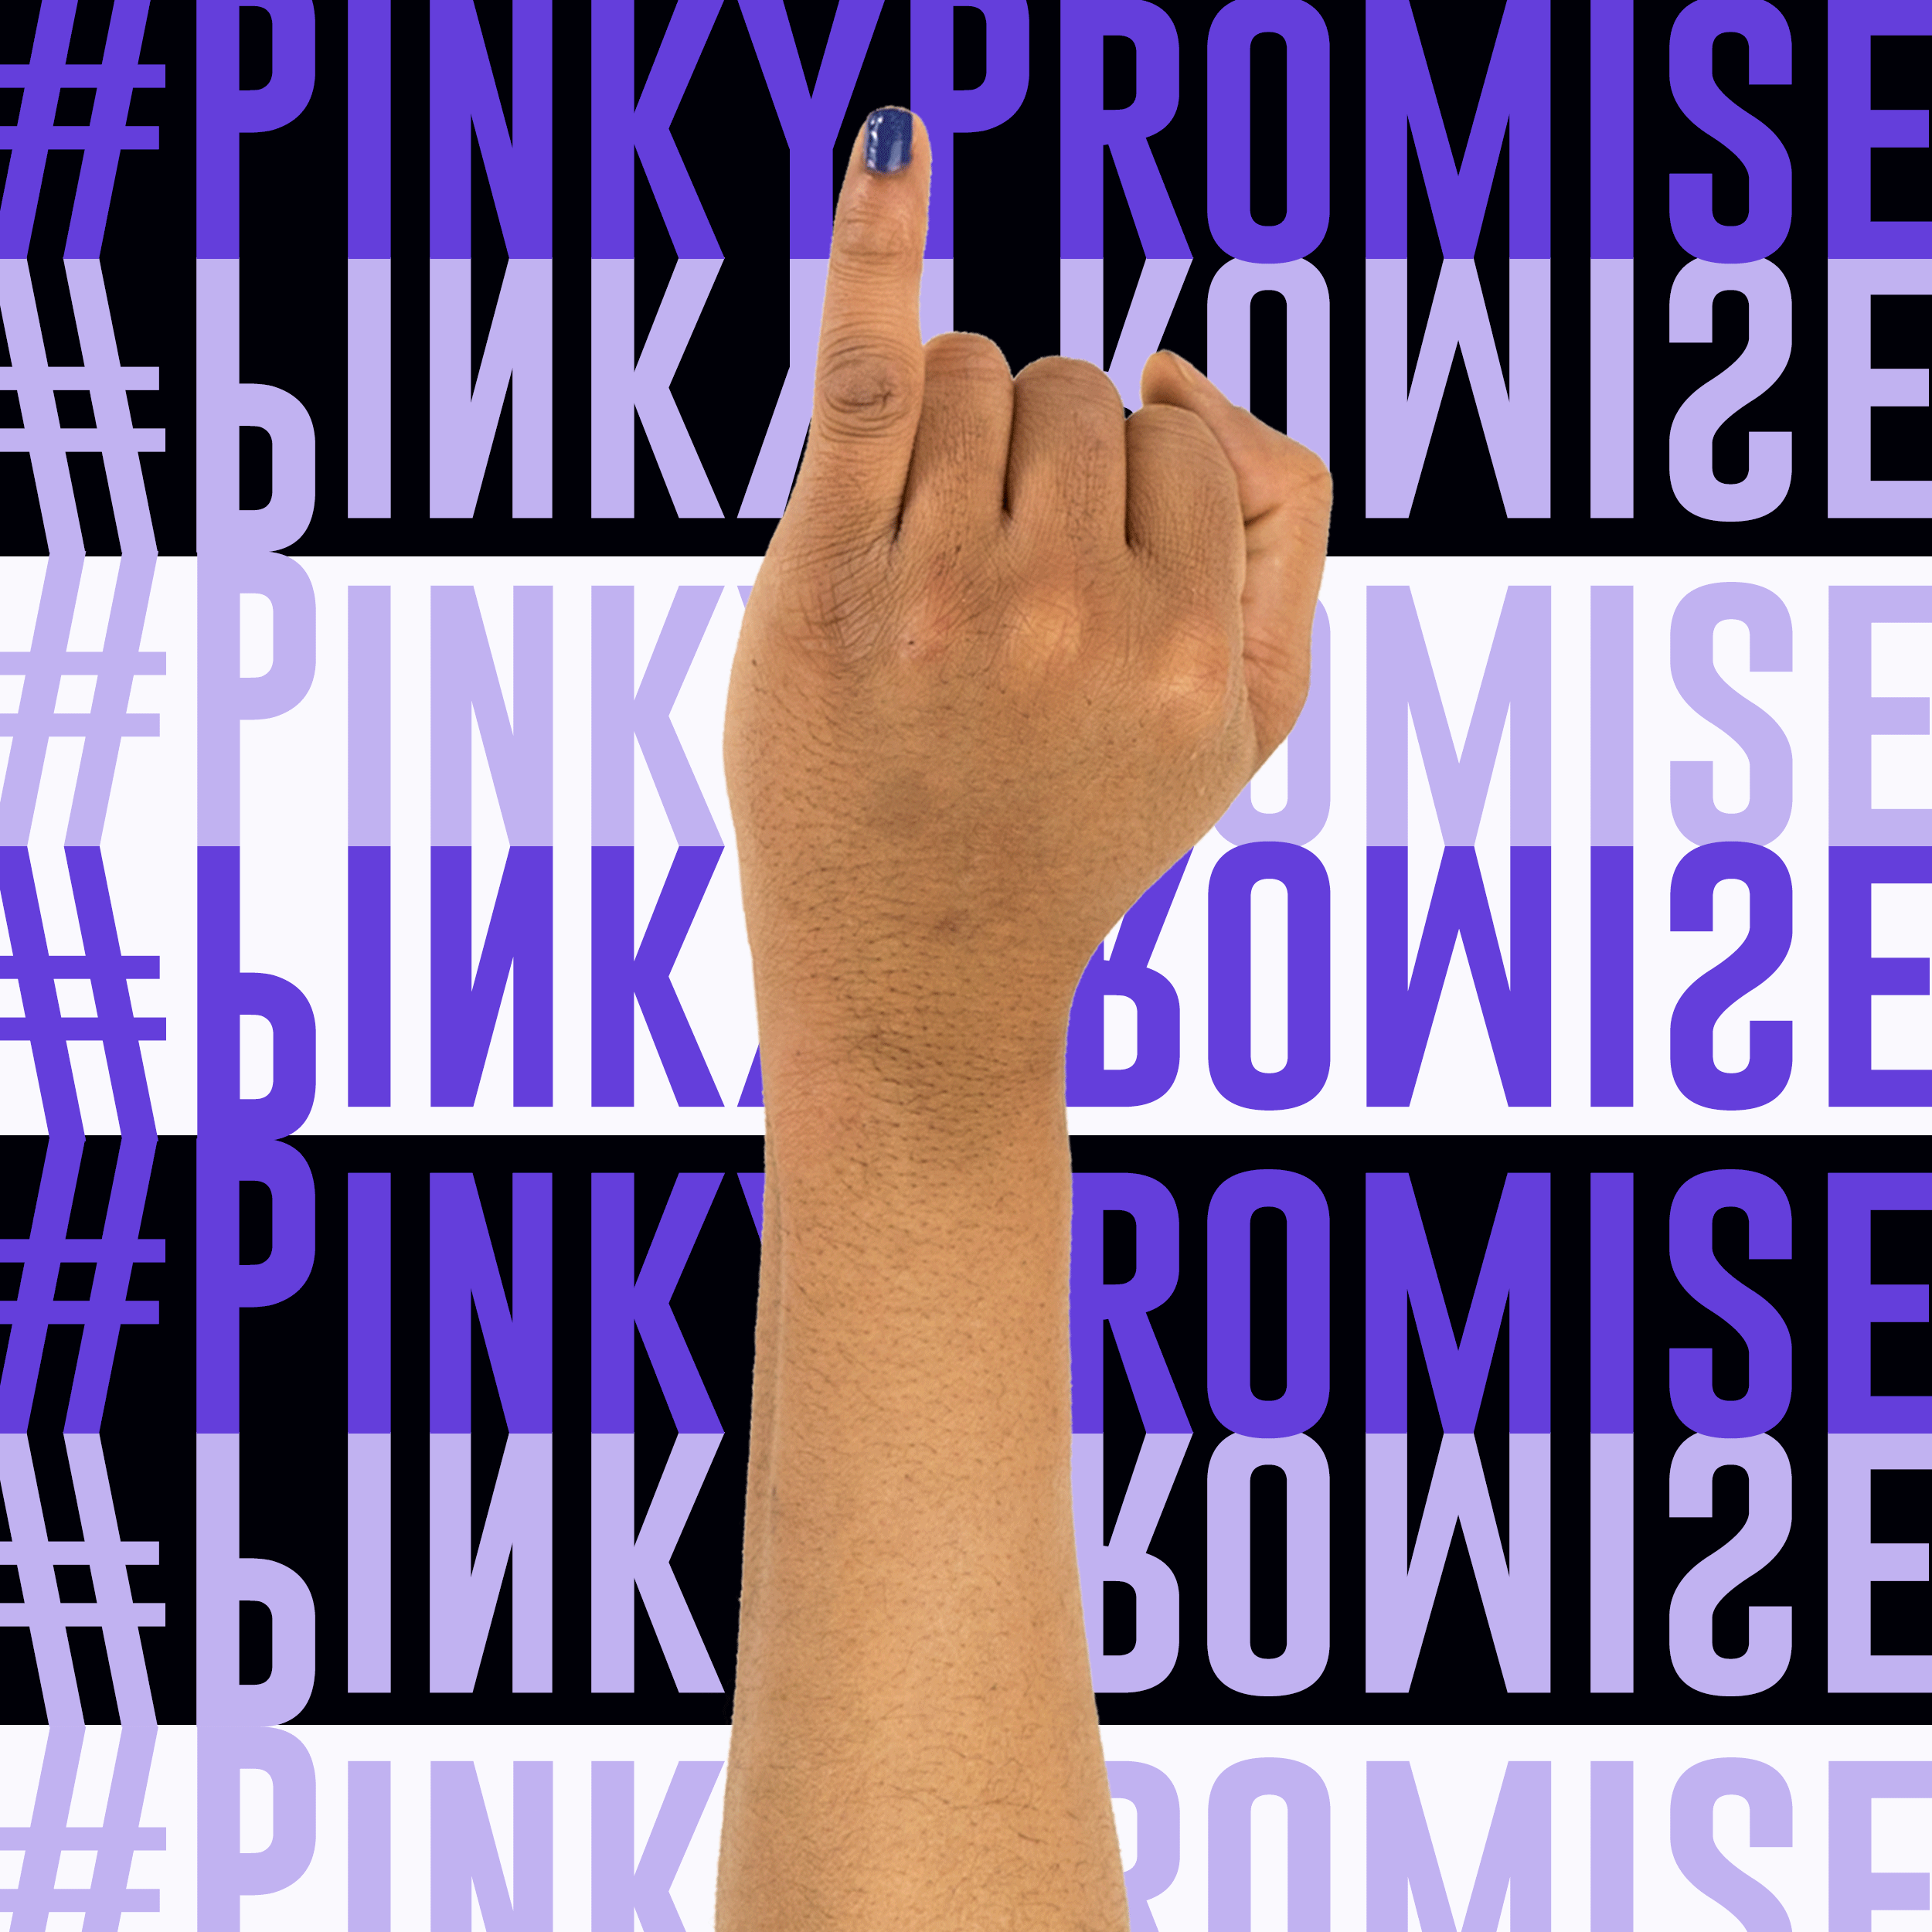 pinkypromise_options4.gif